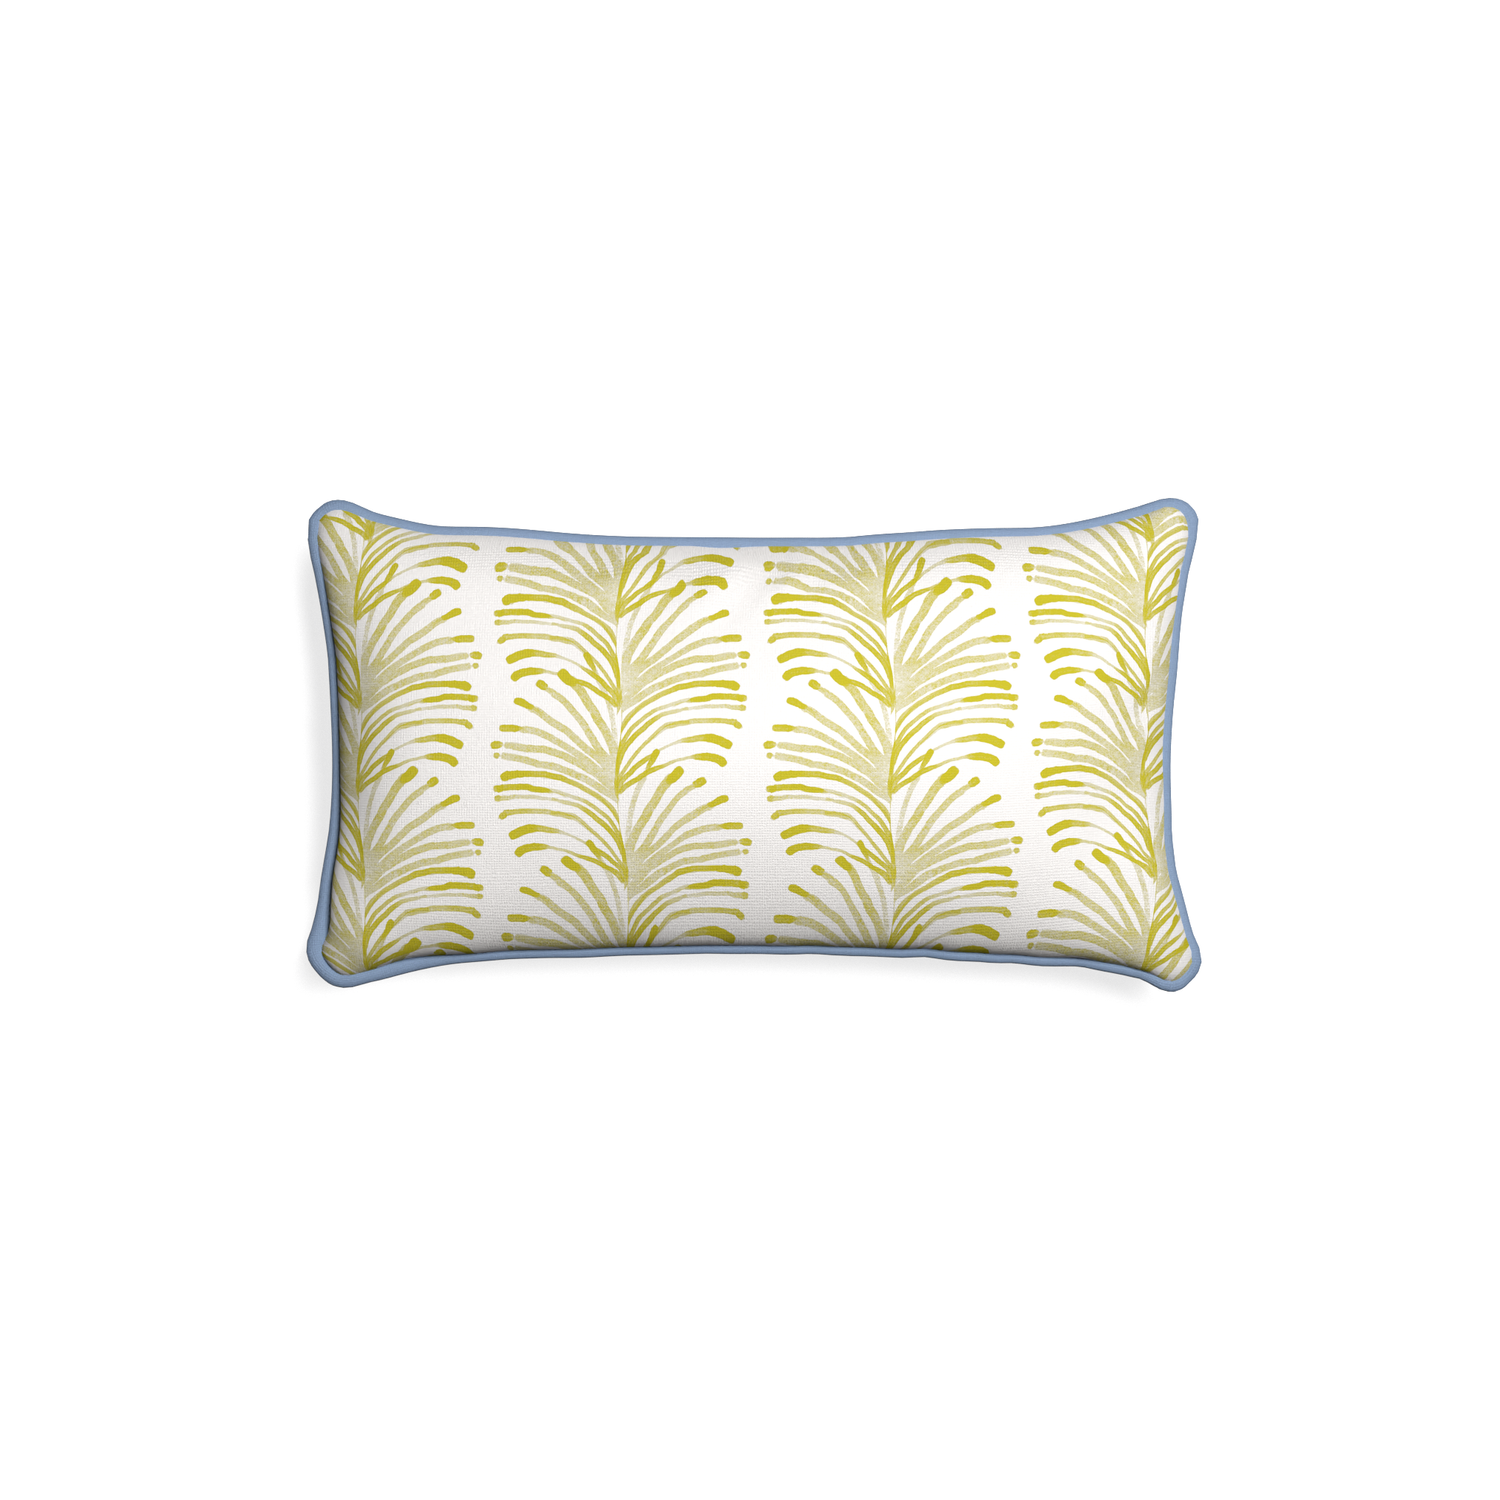 Petite-lumbar emma chartreuse custom yellow stripe chartreusepillow with sky piping on white background